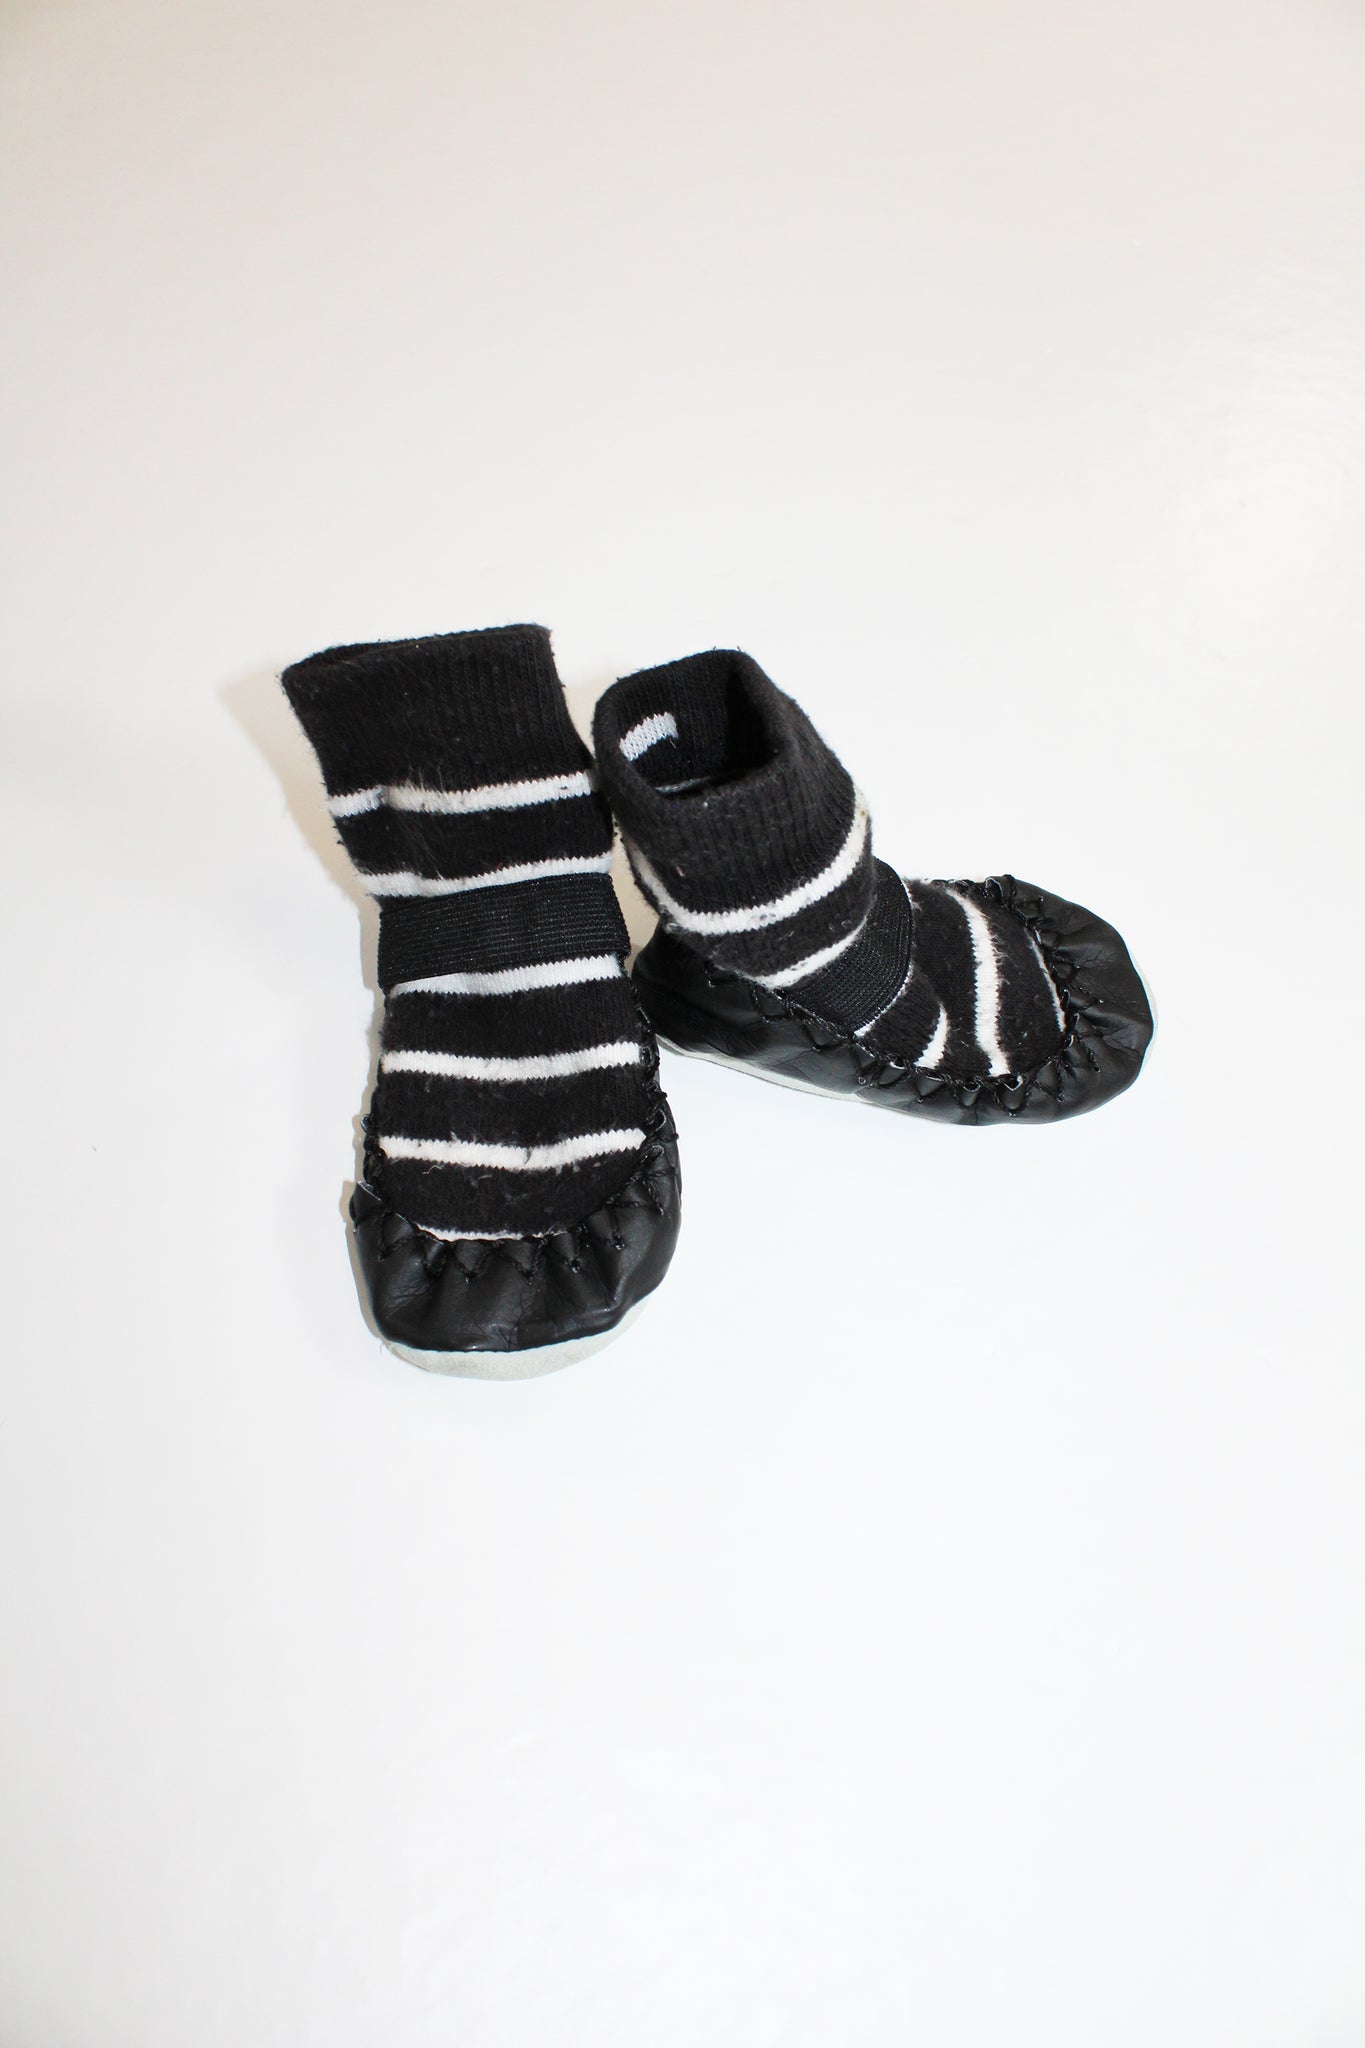 Baby Moccasins One Size / One Size